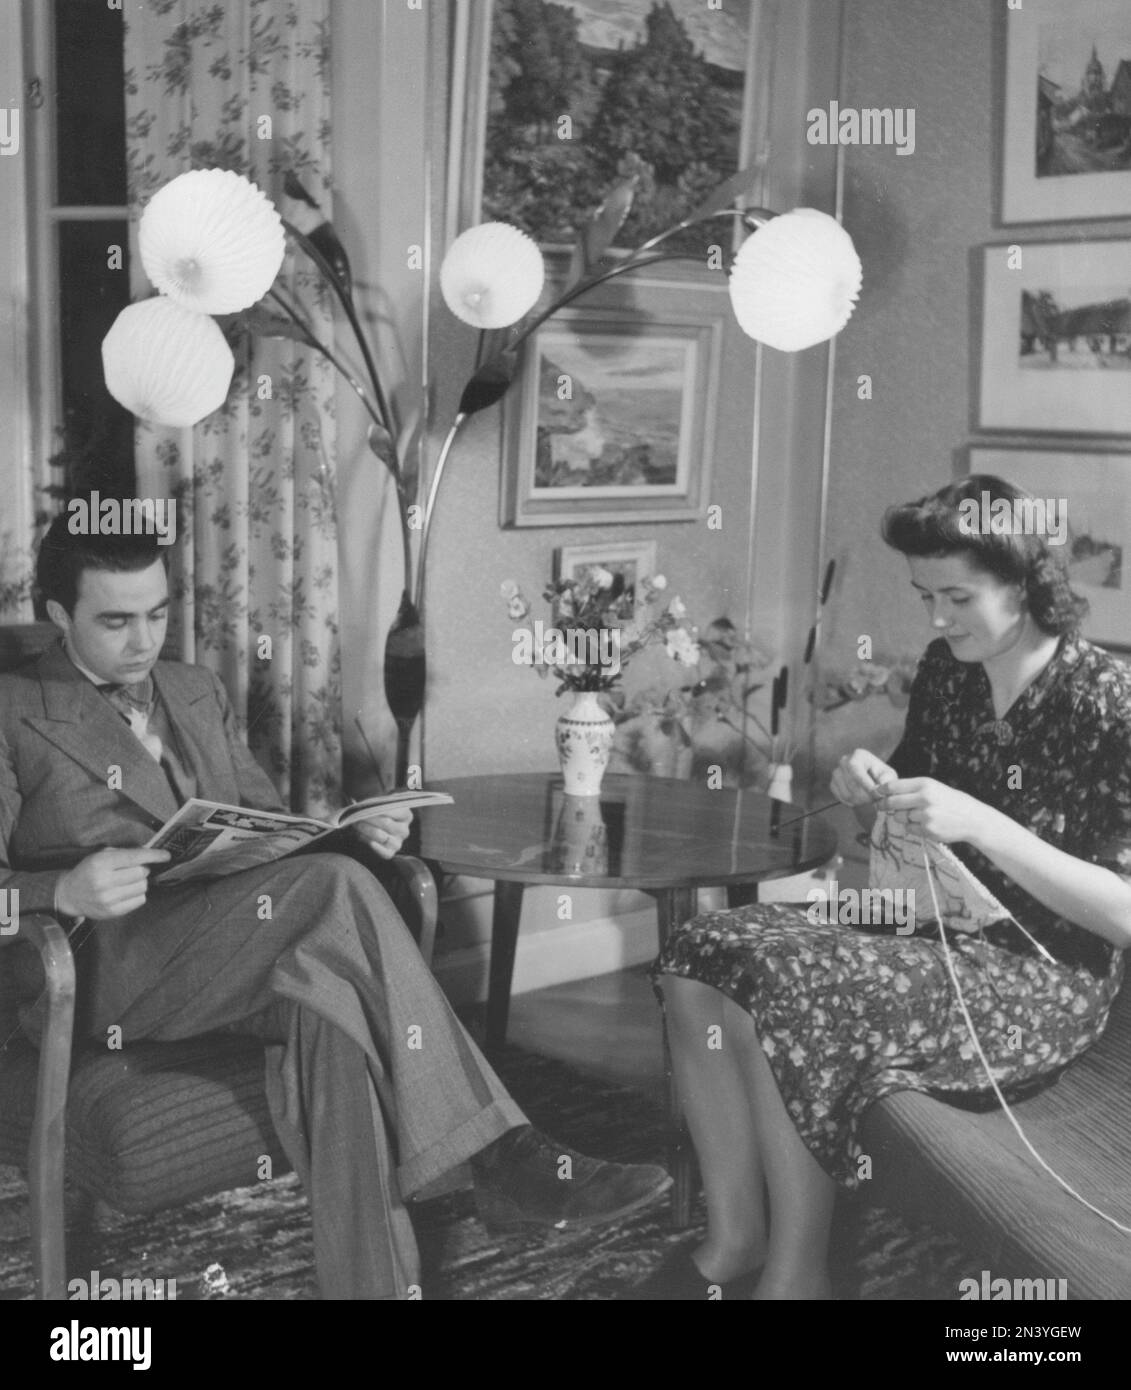 In the 1940s. A couple at home. The man reads a magazine while she is knitting. An lamp with four globes is in focus. Sweden 1946 Stock Photo